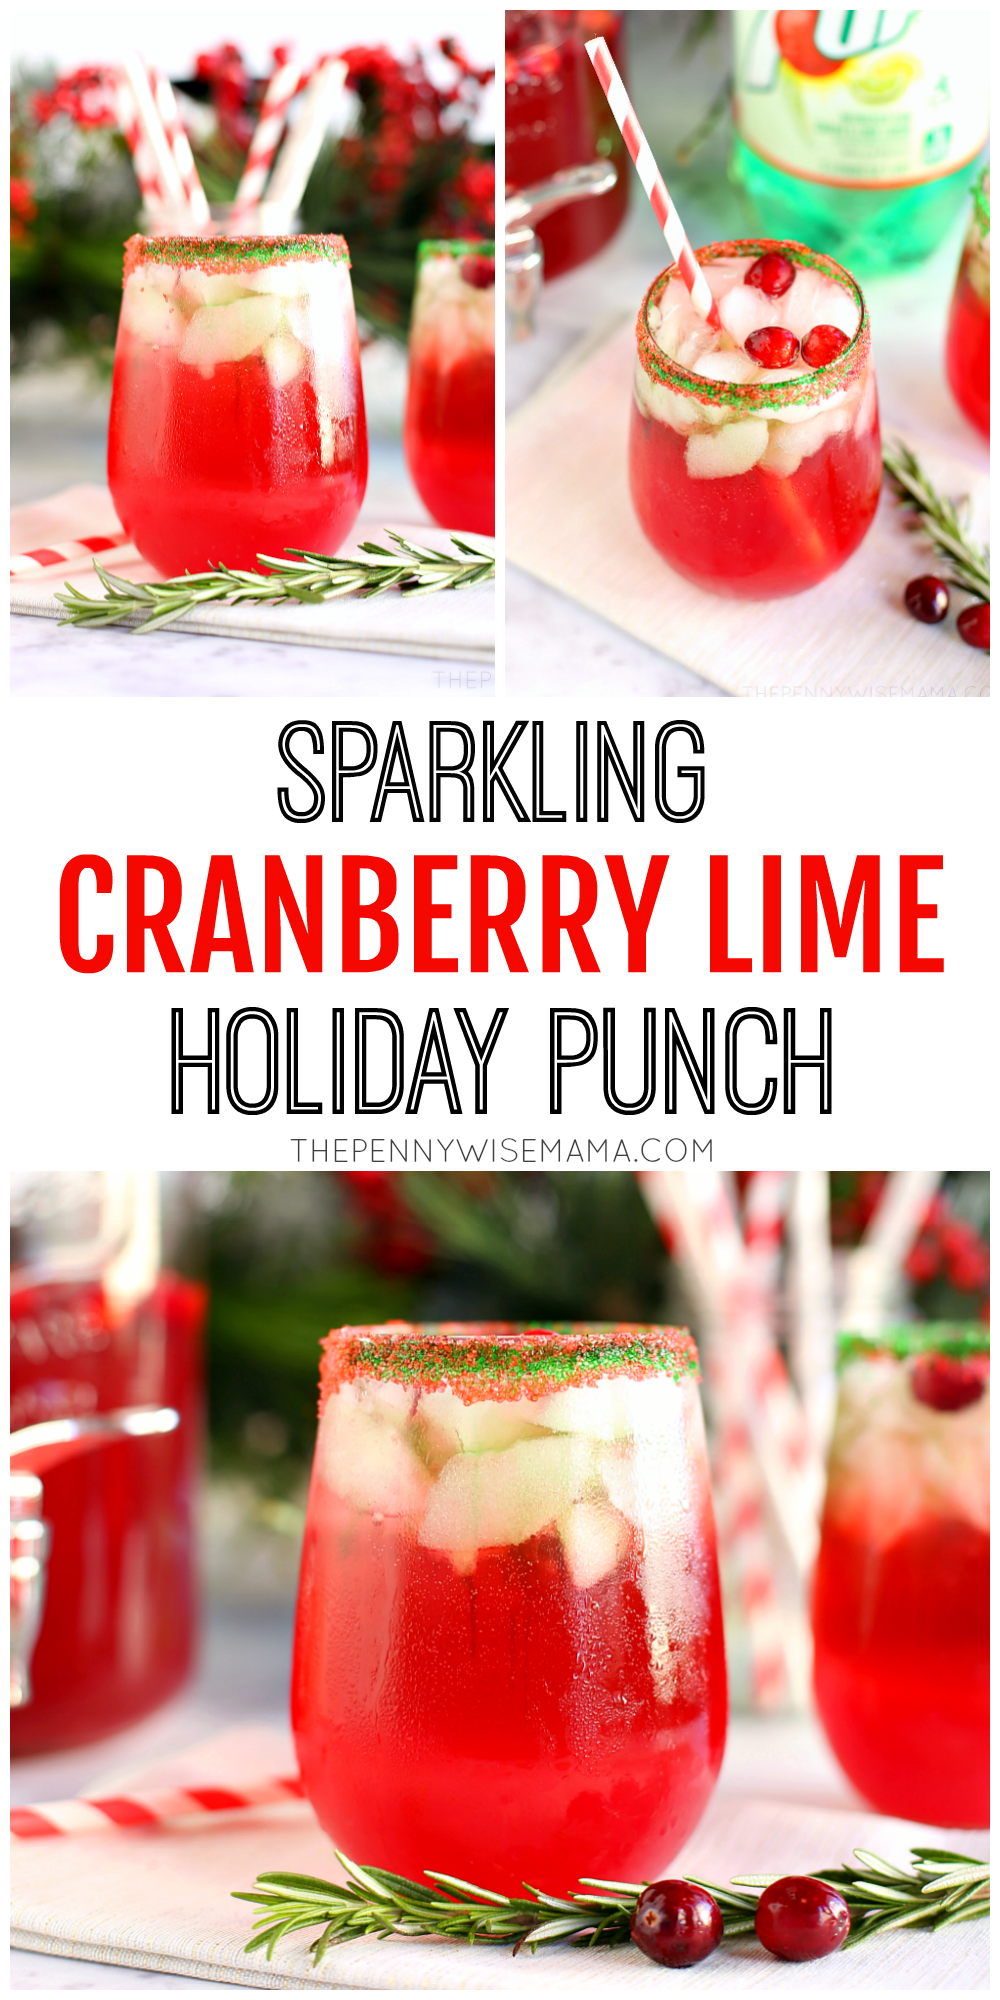 This Sparkling Cranberry Lime Holiday Punch is festive and delicious -- perfect for holiday parties! Serve it as a cocktail or mocktail on Christmas, New Year's Eve or any time of the year.